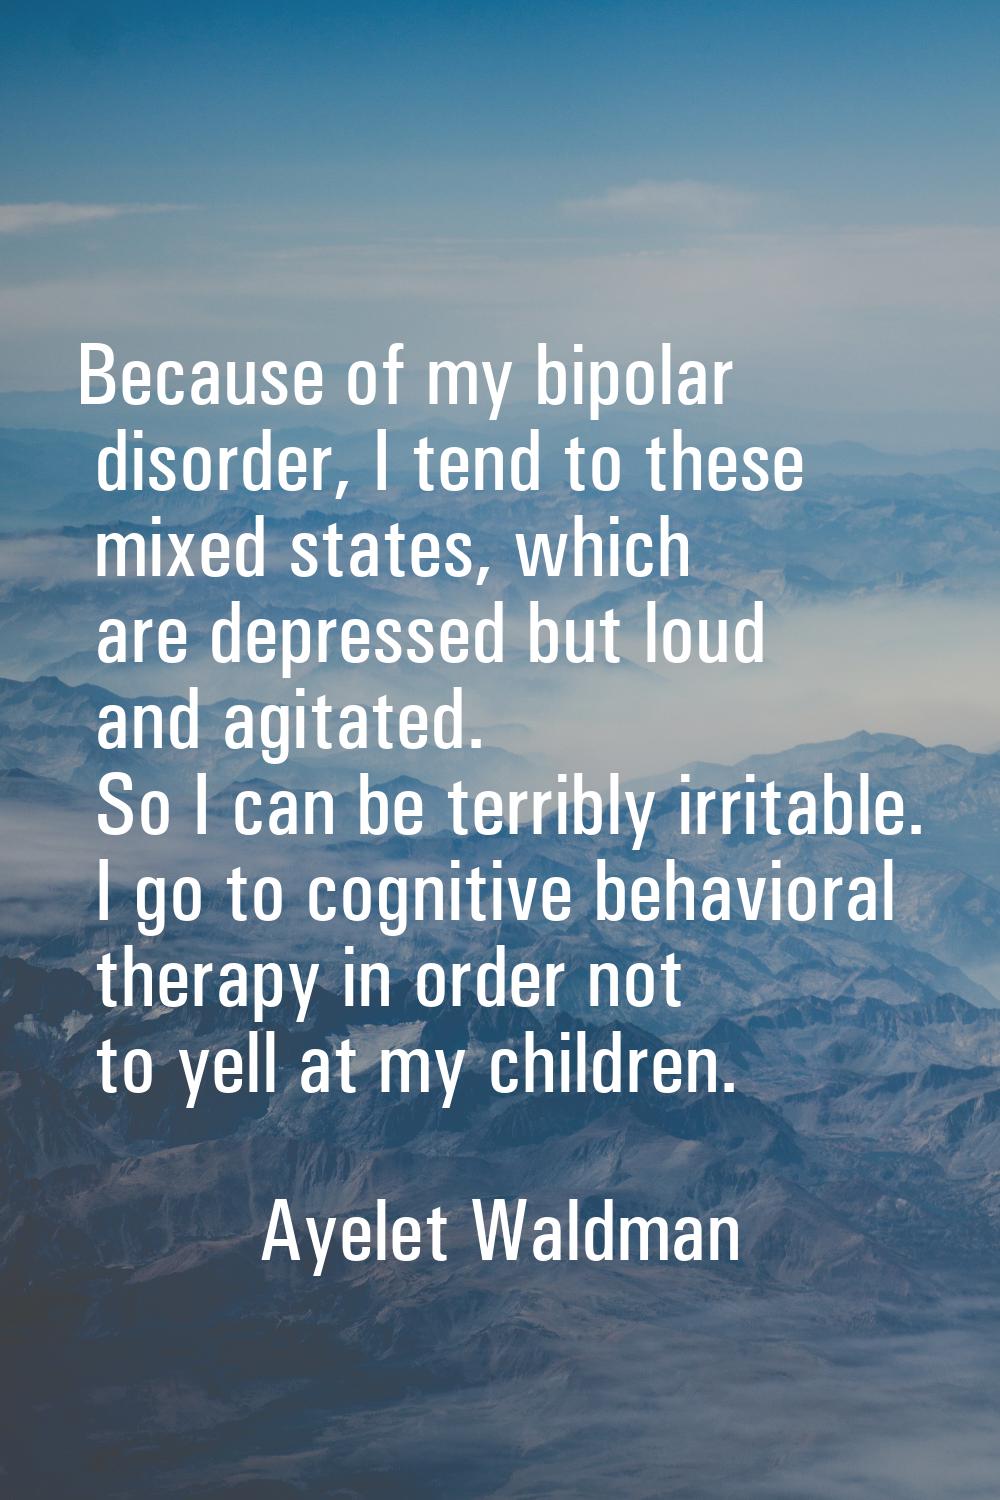 Because of my bipolar disorder, I tend to these mixed states, which are depressed but loud and agit